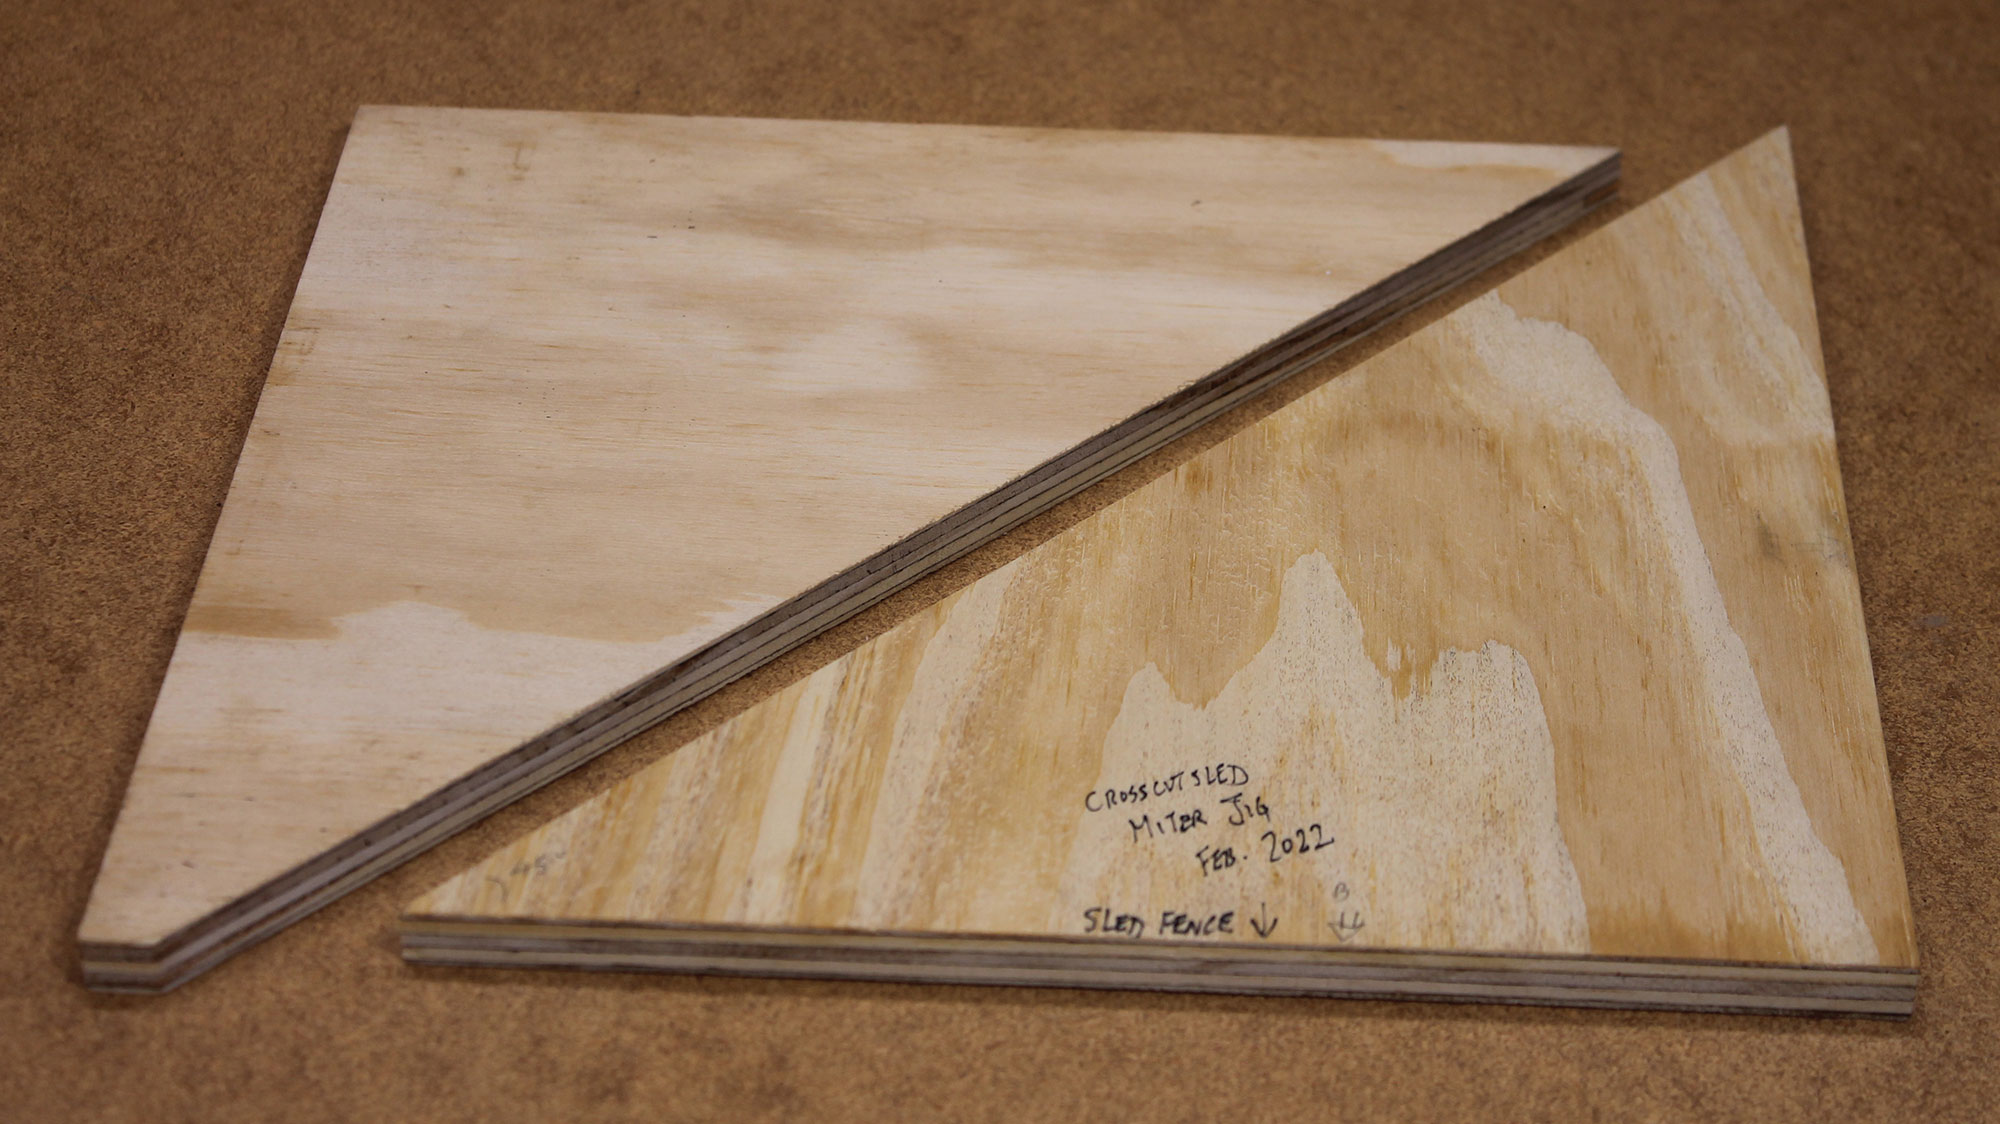 Photo 6 – These triangular fixtures enable the sled to cut miter corners.